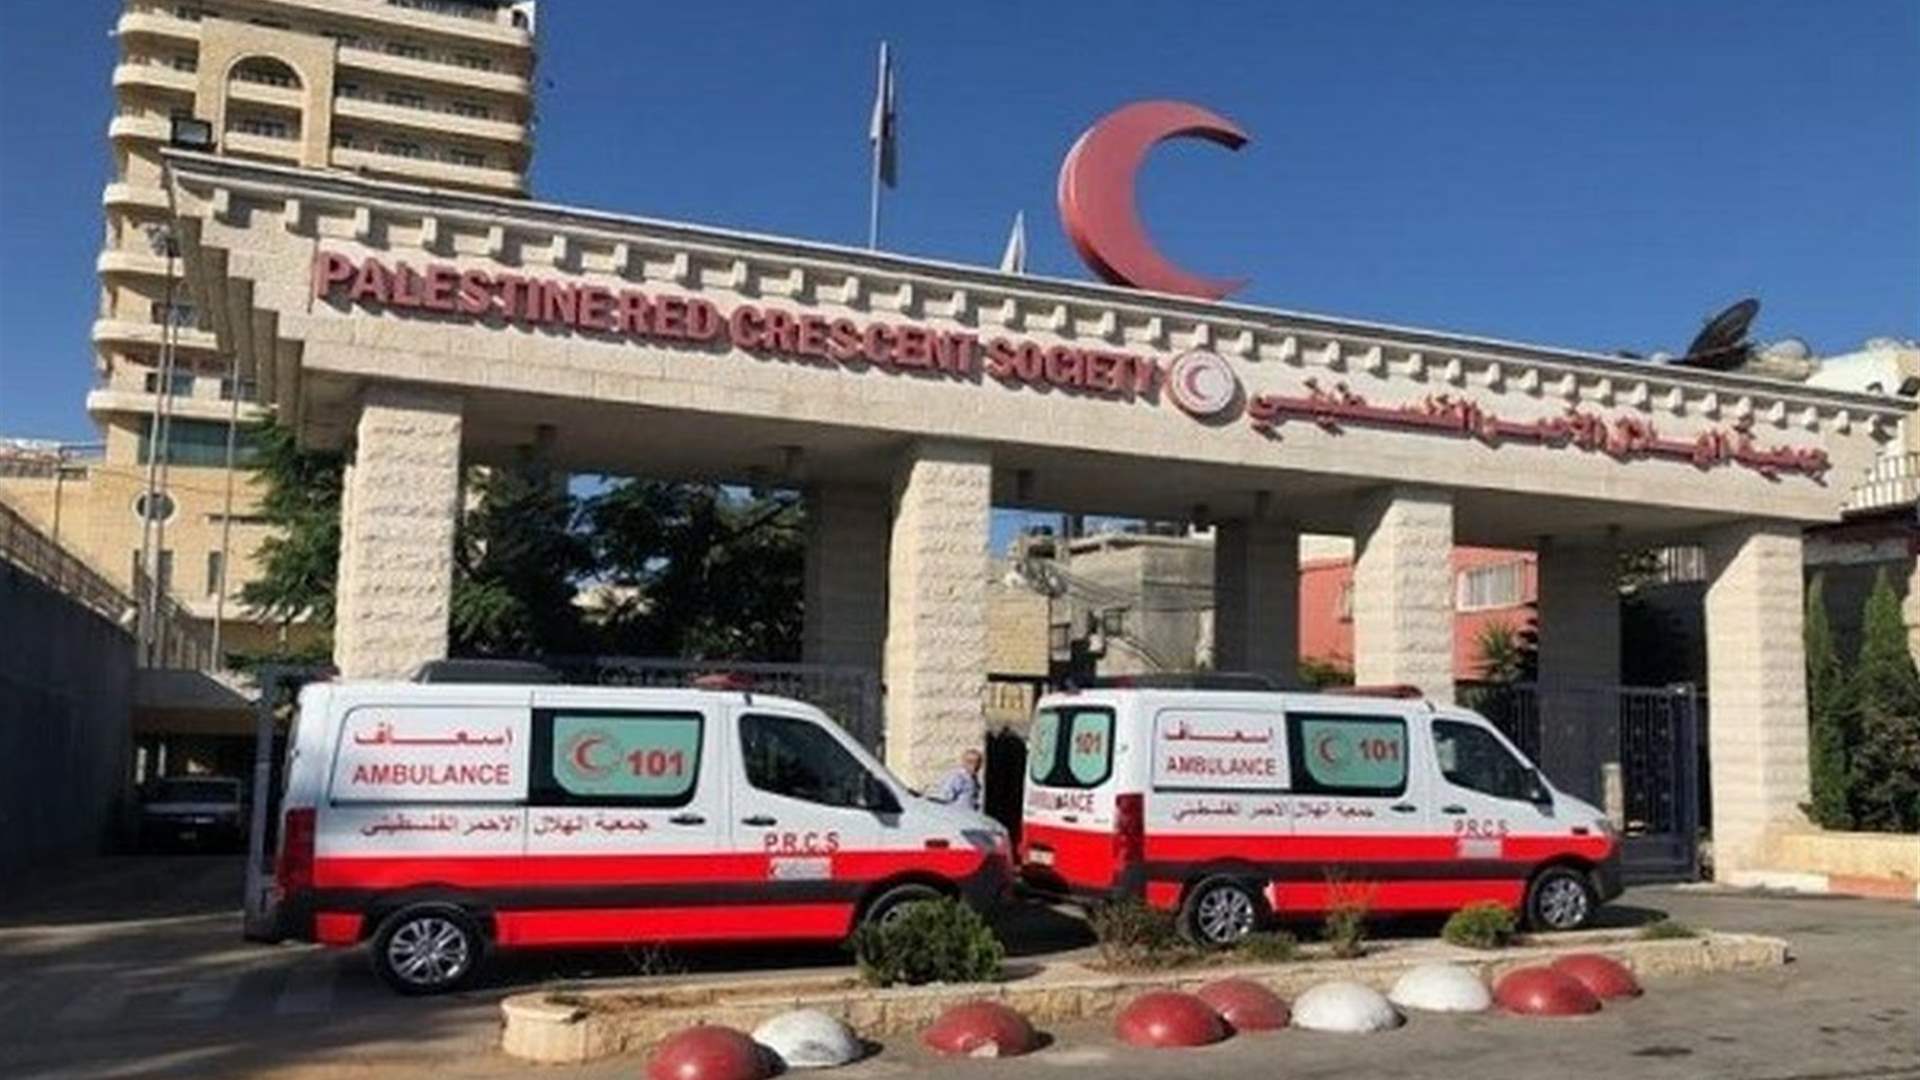 Palestinian Red Crescent: The only power generator in Al-Amal Hospital in Khan Younis stopped, threatening the lives of 90 patients and 9,000 displaced people